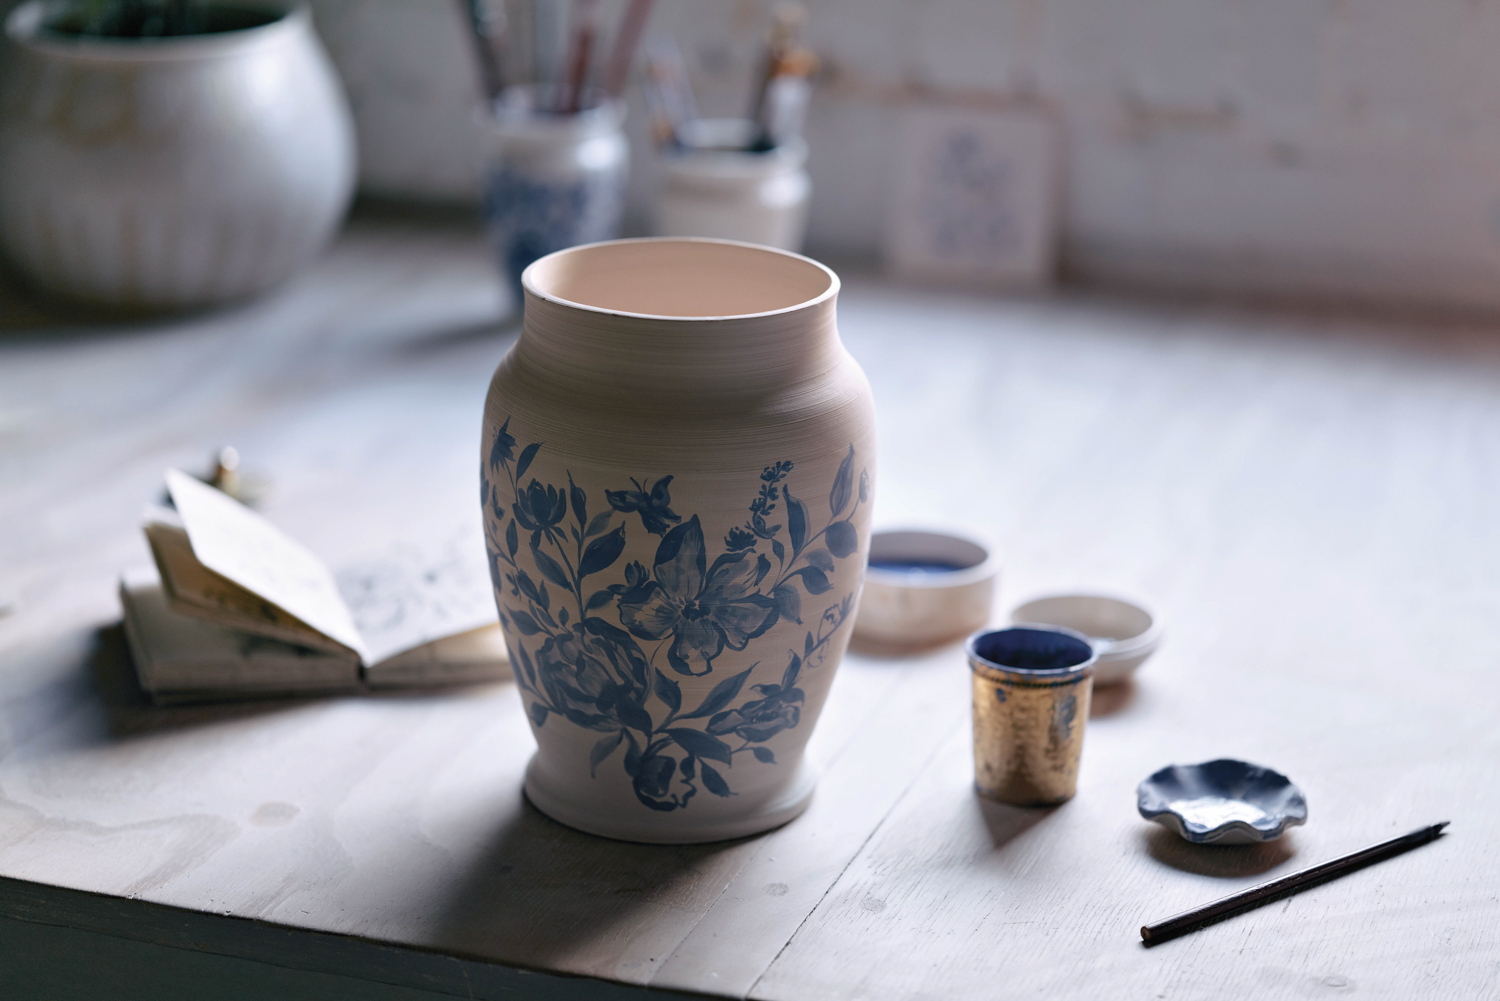 A freshly painted ceramic vessel depicts flowers, leaves and butterflies in an alluring shade of blue